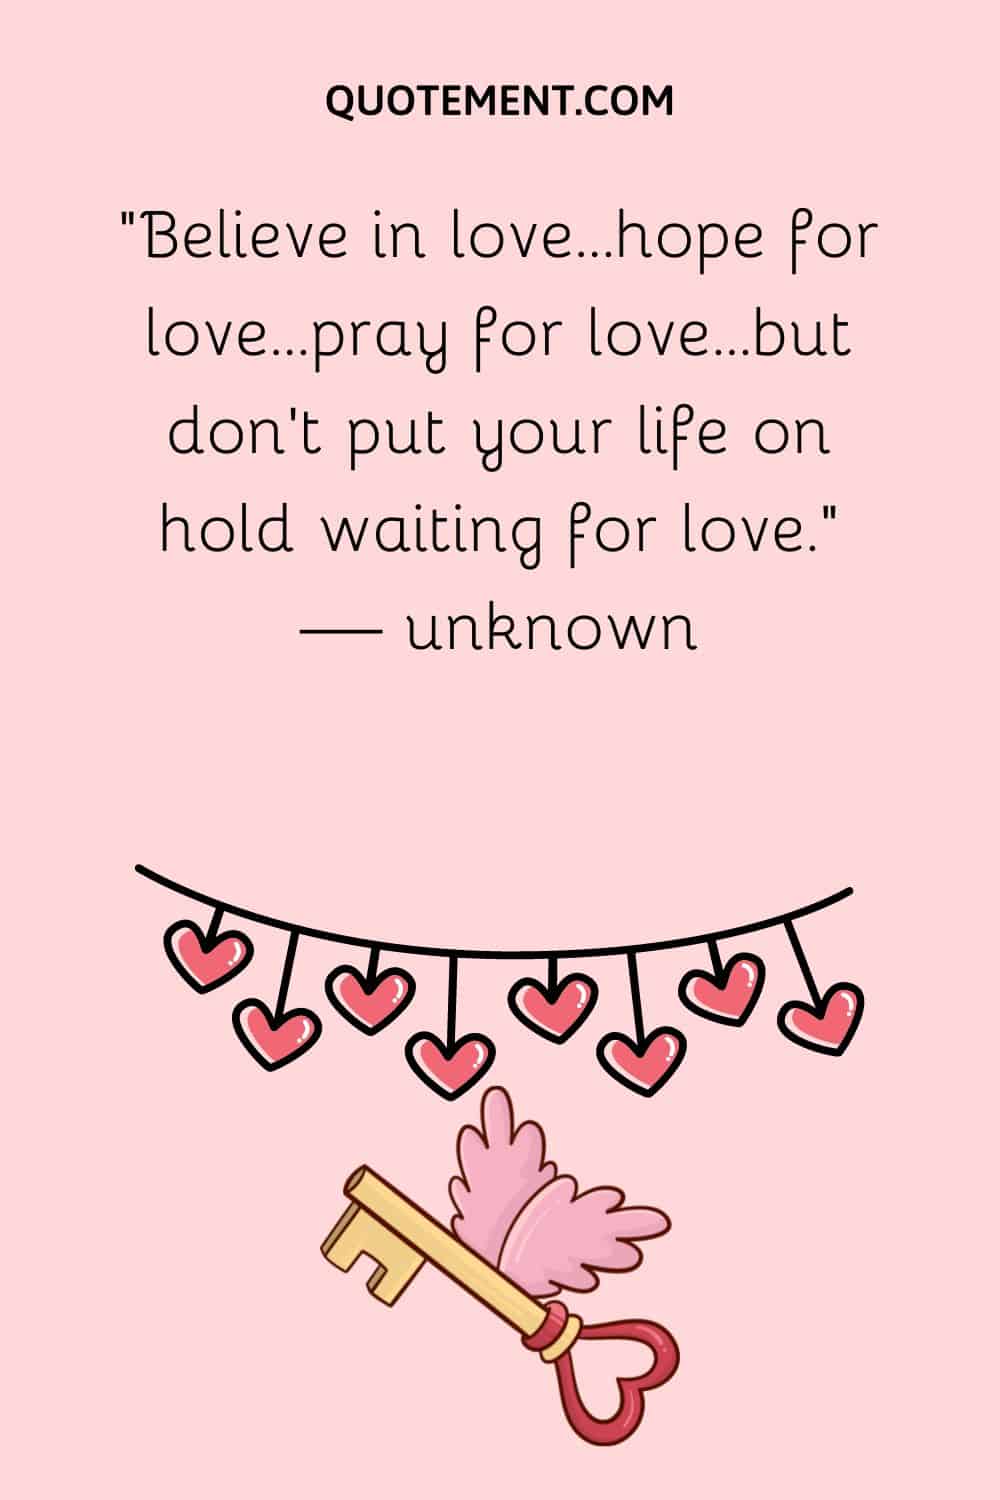 “Believe in love...hope for love...pray for love...but don't put your life on hold waiting for love.” — unknown